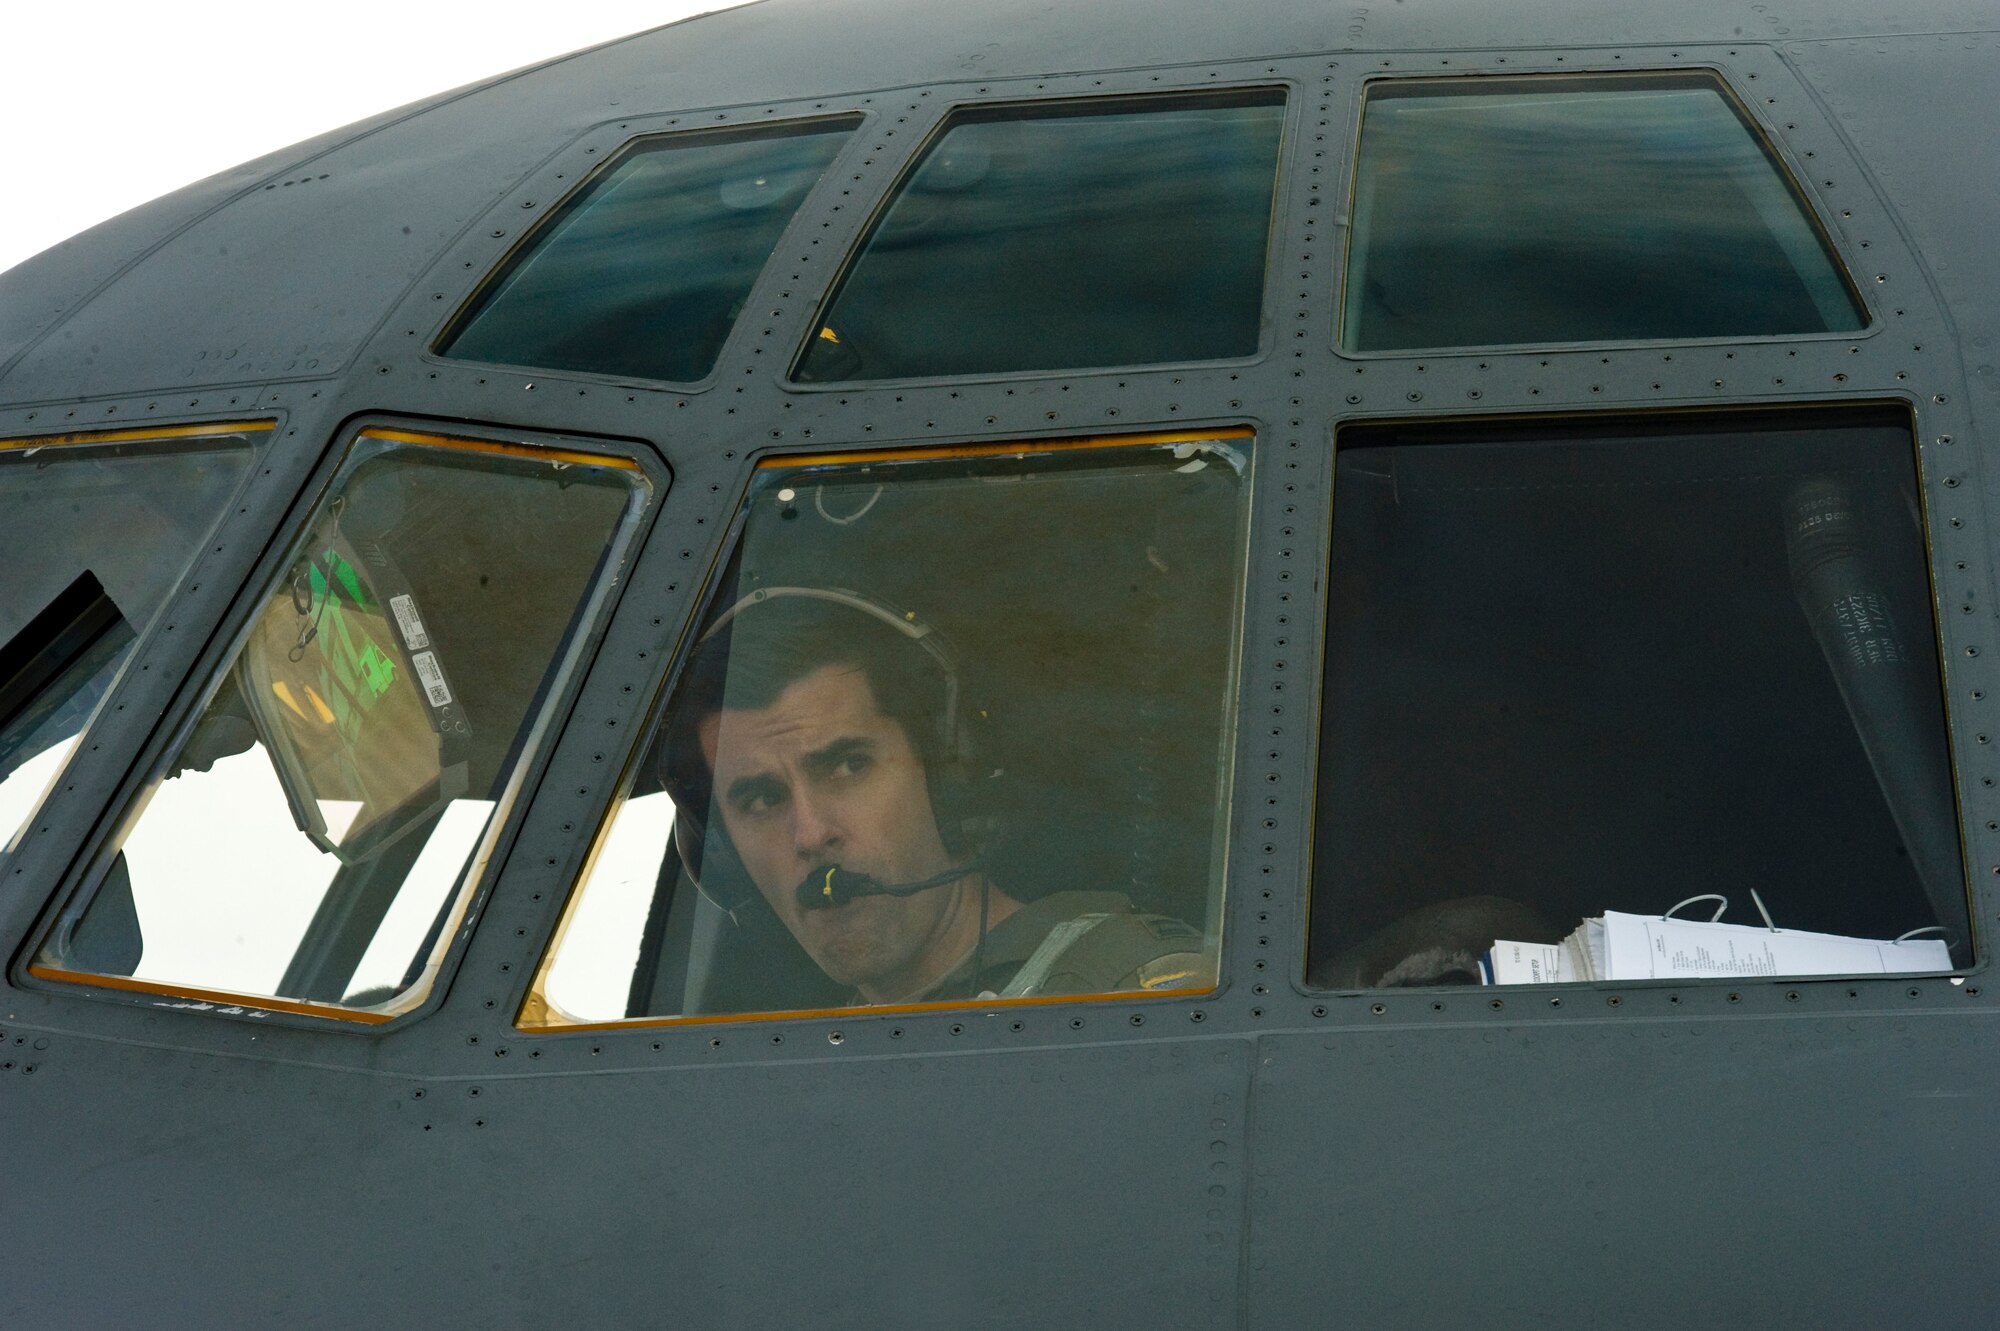 U.S. Air Force Capt. Timothy Fritz, 37th Airlift Squadron, looks out the window of a C-130J Hercules at Ramstein Air Base, Germany, in preparation for take off during a training airdrop mission at the Marnheim, Germany drop zone, Feb. 10, 2011. The single C-130J aircraft from the 37th Airlift Squadron, 86th Airlift Wing will drop more than fifty service members at the drop site.  (U.S. Air Force photo/TSgt Wayne Clark, AFNE Regional News Bureau) (Released)